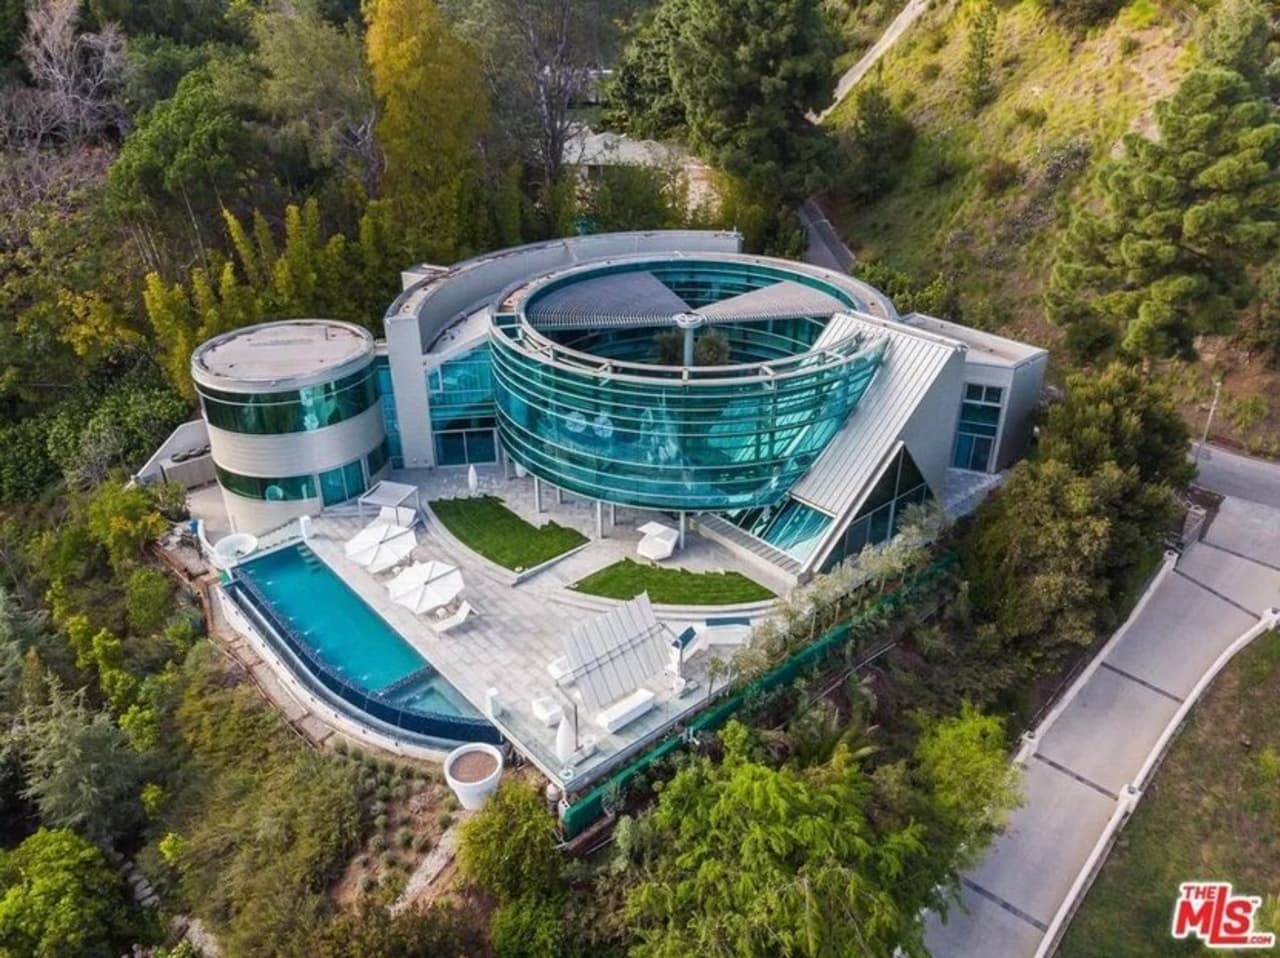 It’s all-round wild: This ‘salad spinner house,’ rented by Justin Bieber, can be yours for $35 million